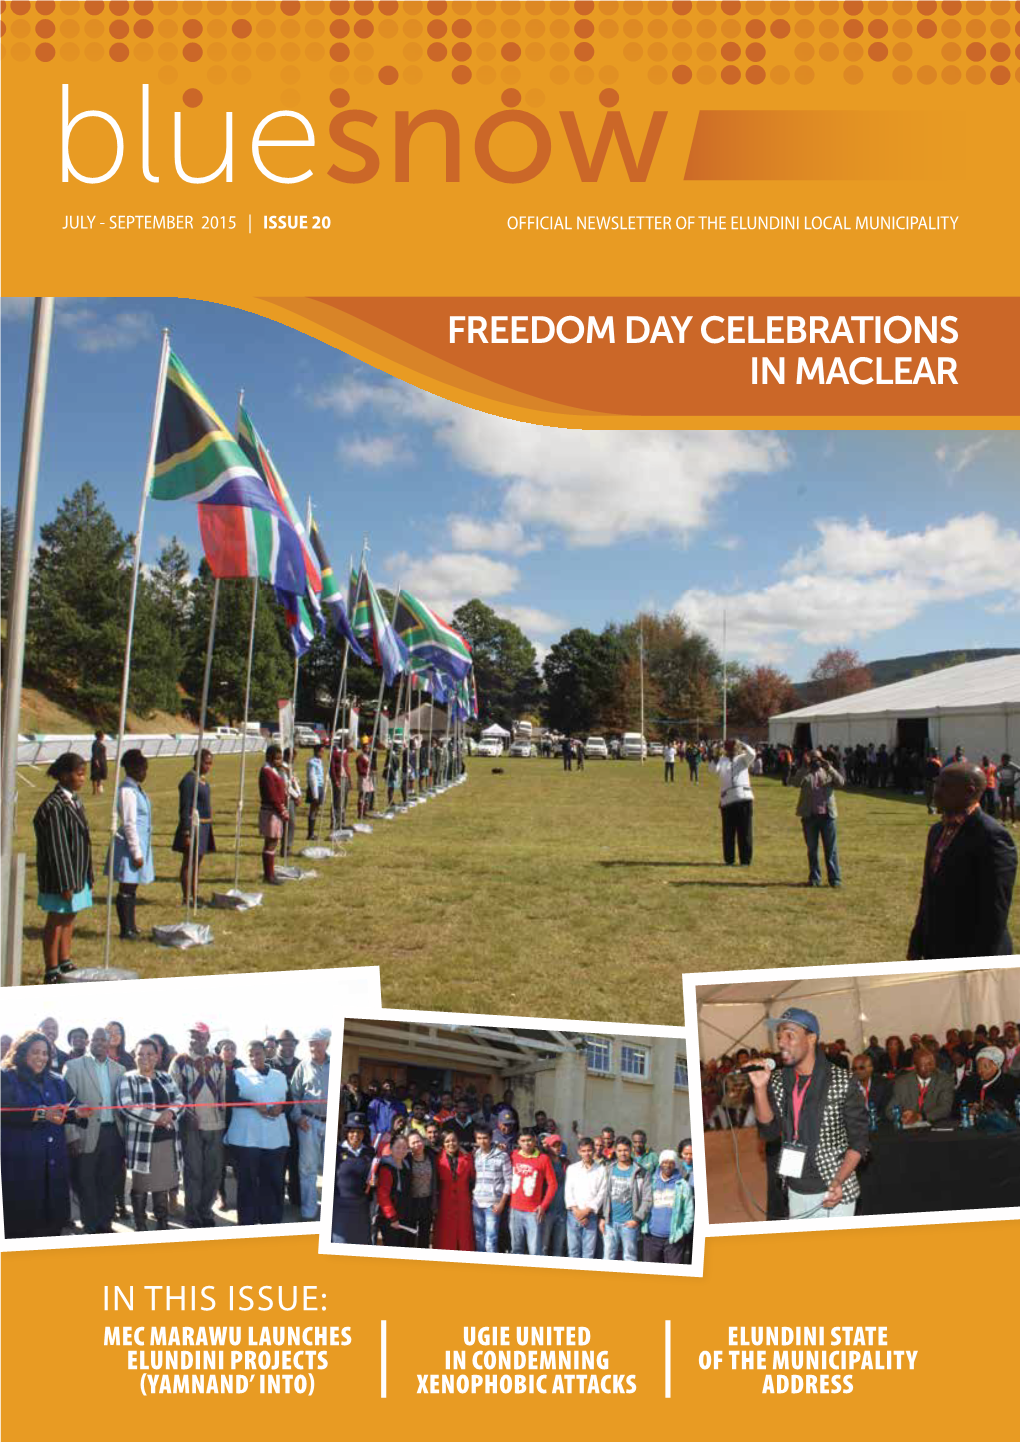 Freedom Day Celebrations in Maclear